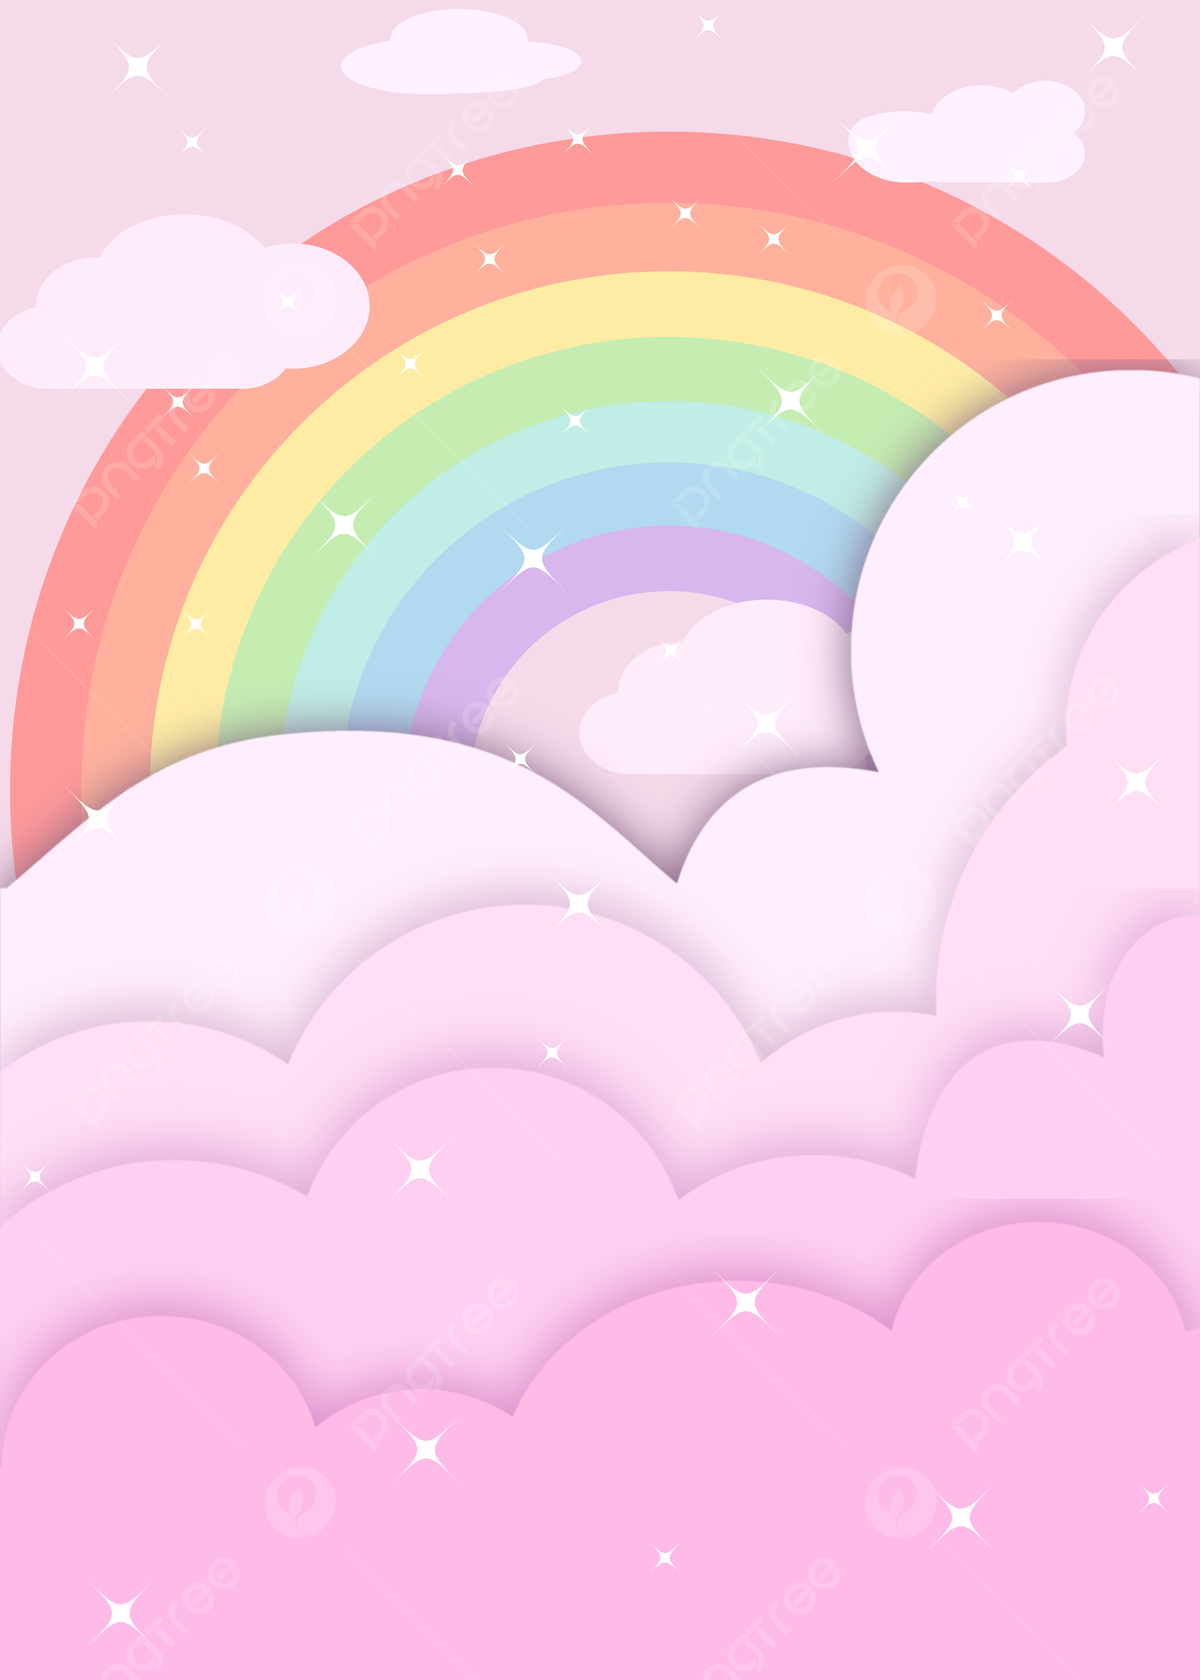 Pink Cute Rainbow Clouds Background Wallpaper Image For Free Download